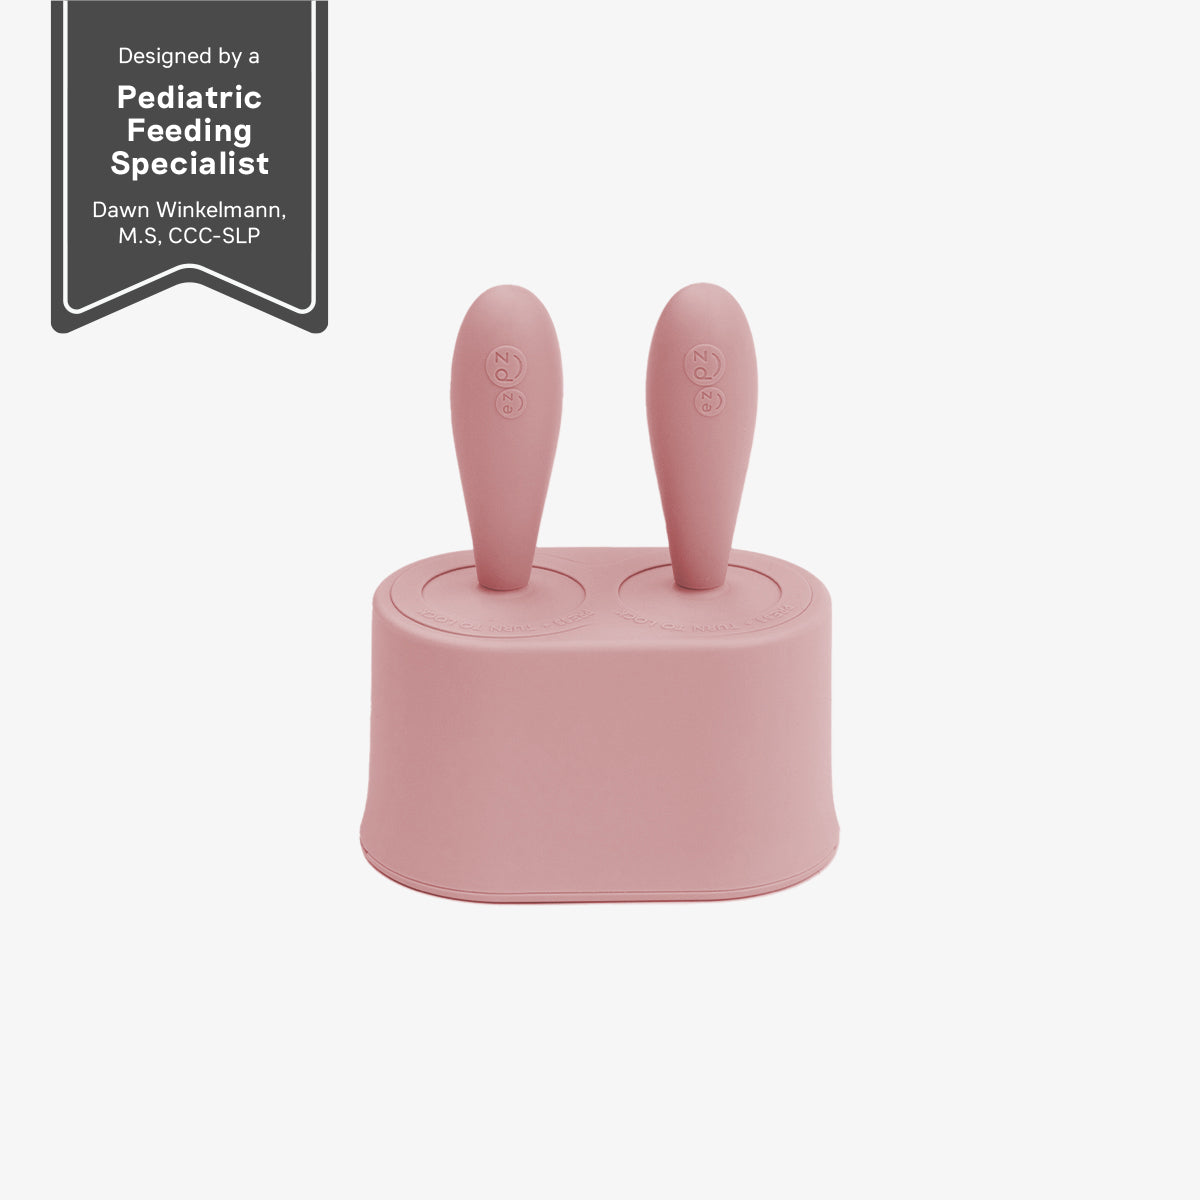 Tiny Pops in Blush / Silicone Popsicle Mold for Babies, Frozen Puree & Breastmilk Popsicles